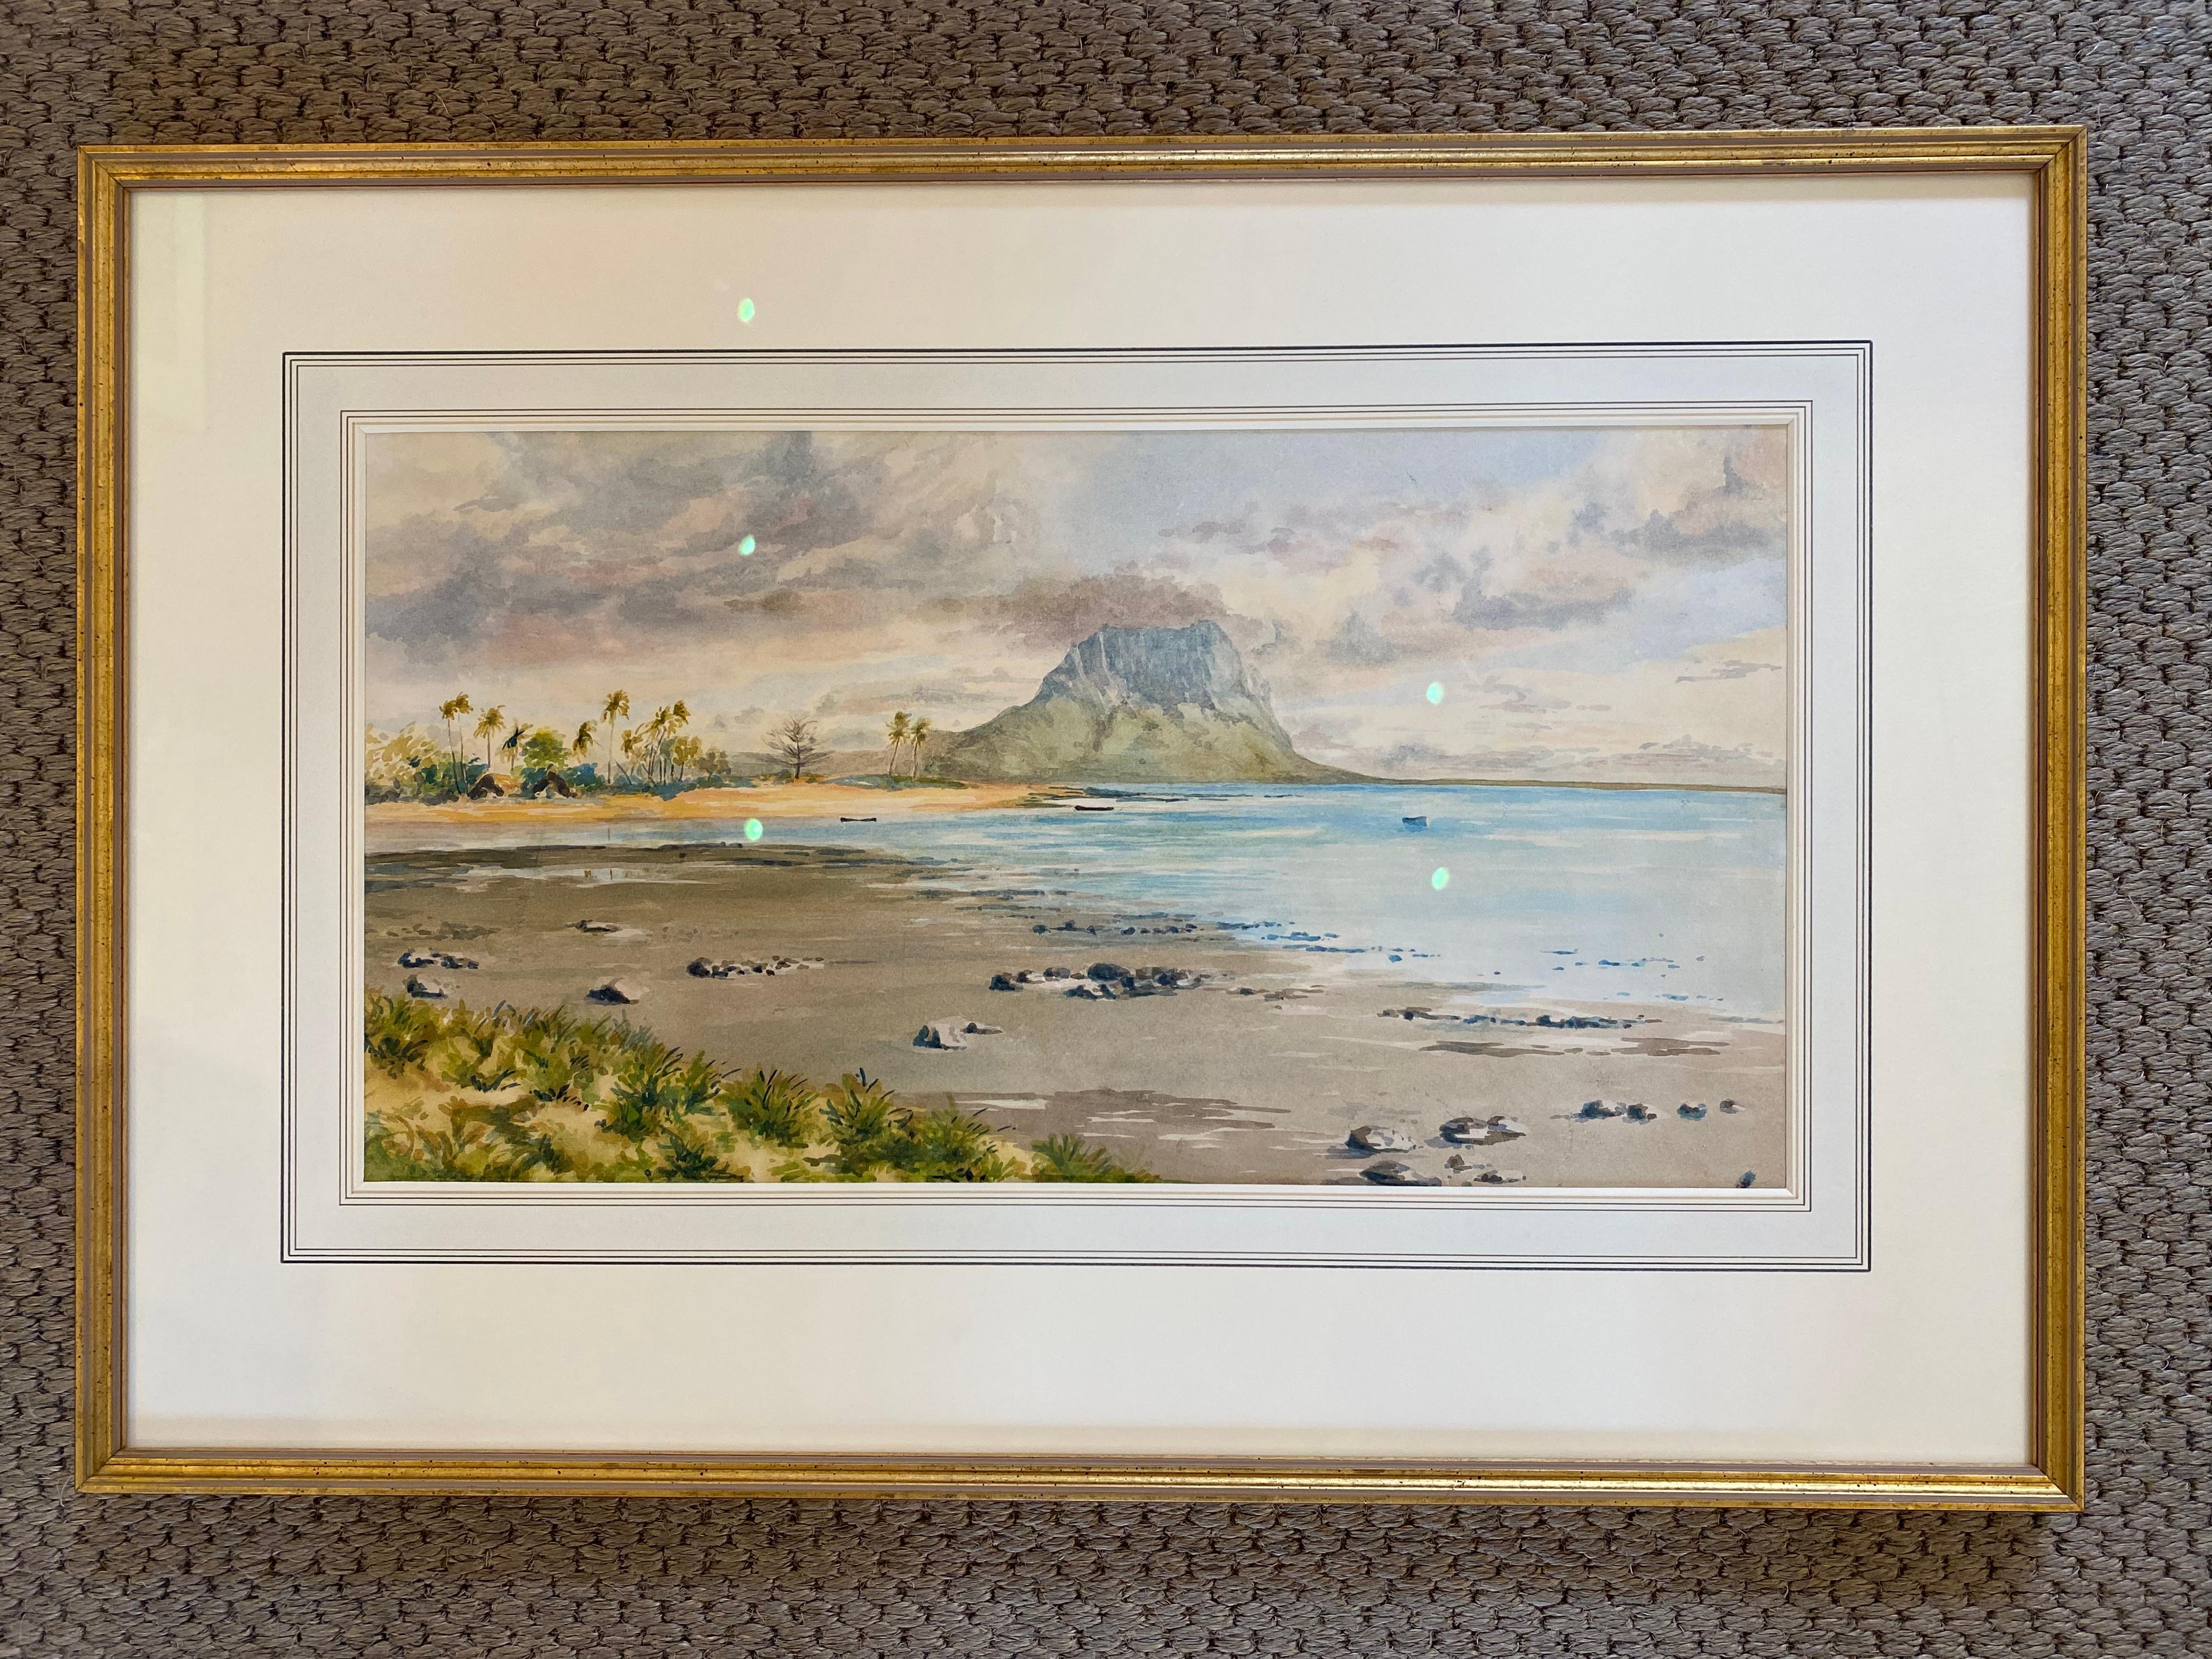 Le Morne Brabont, Mauritius - Art by Early 20th Century English School